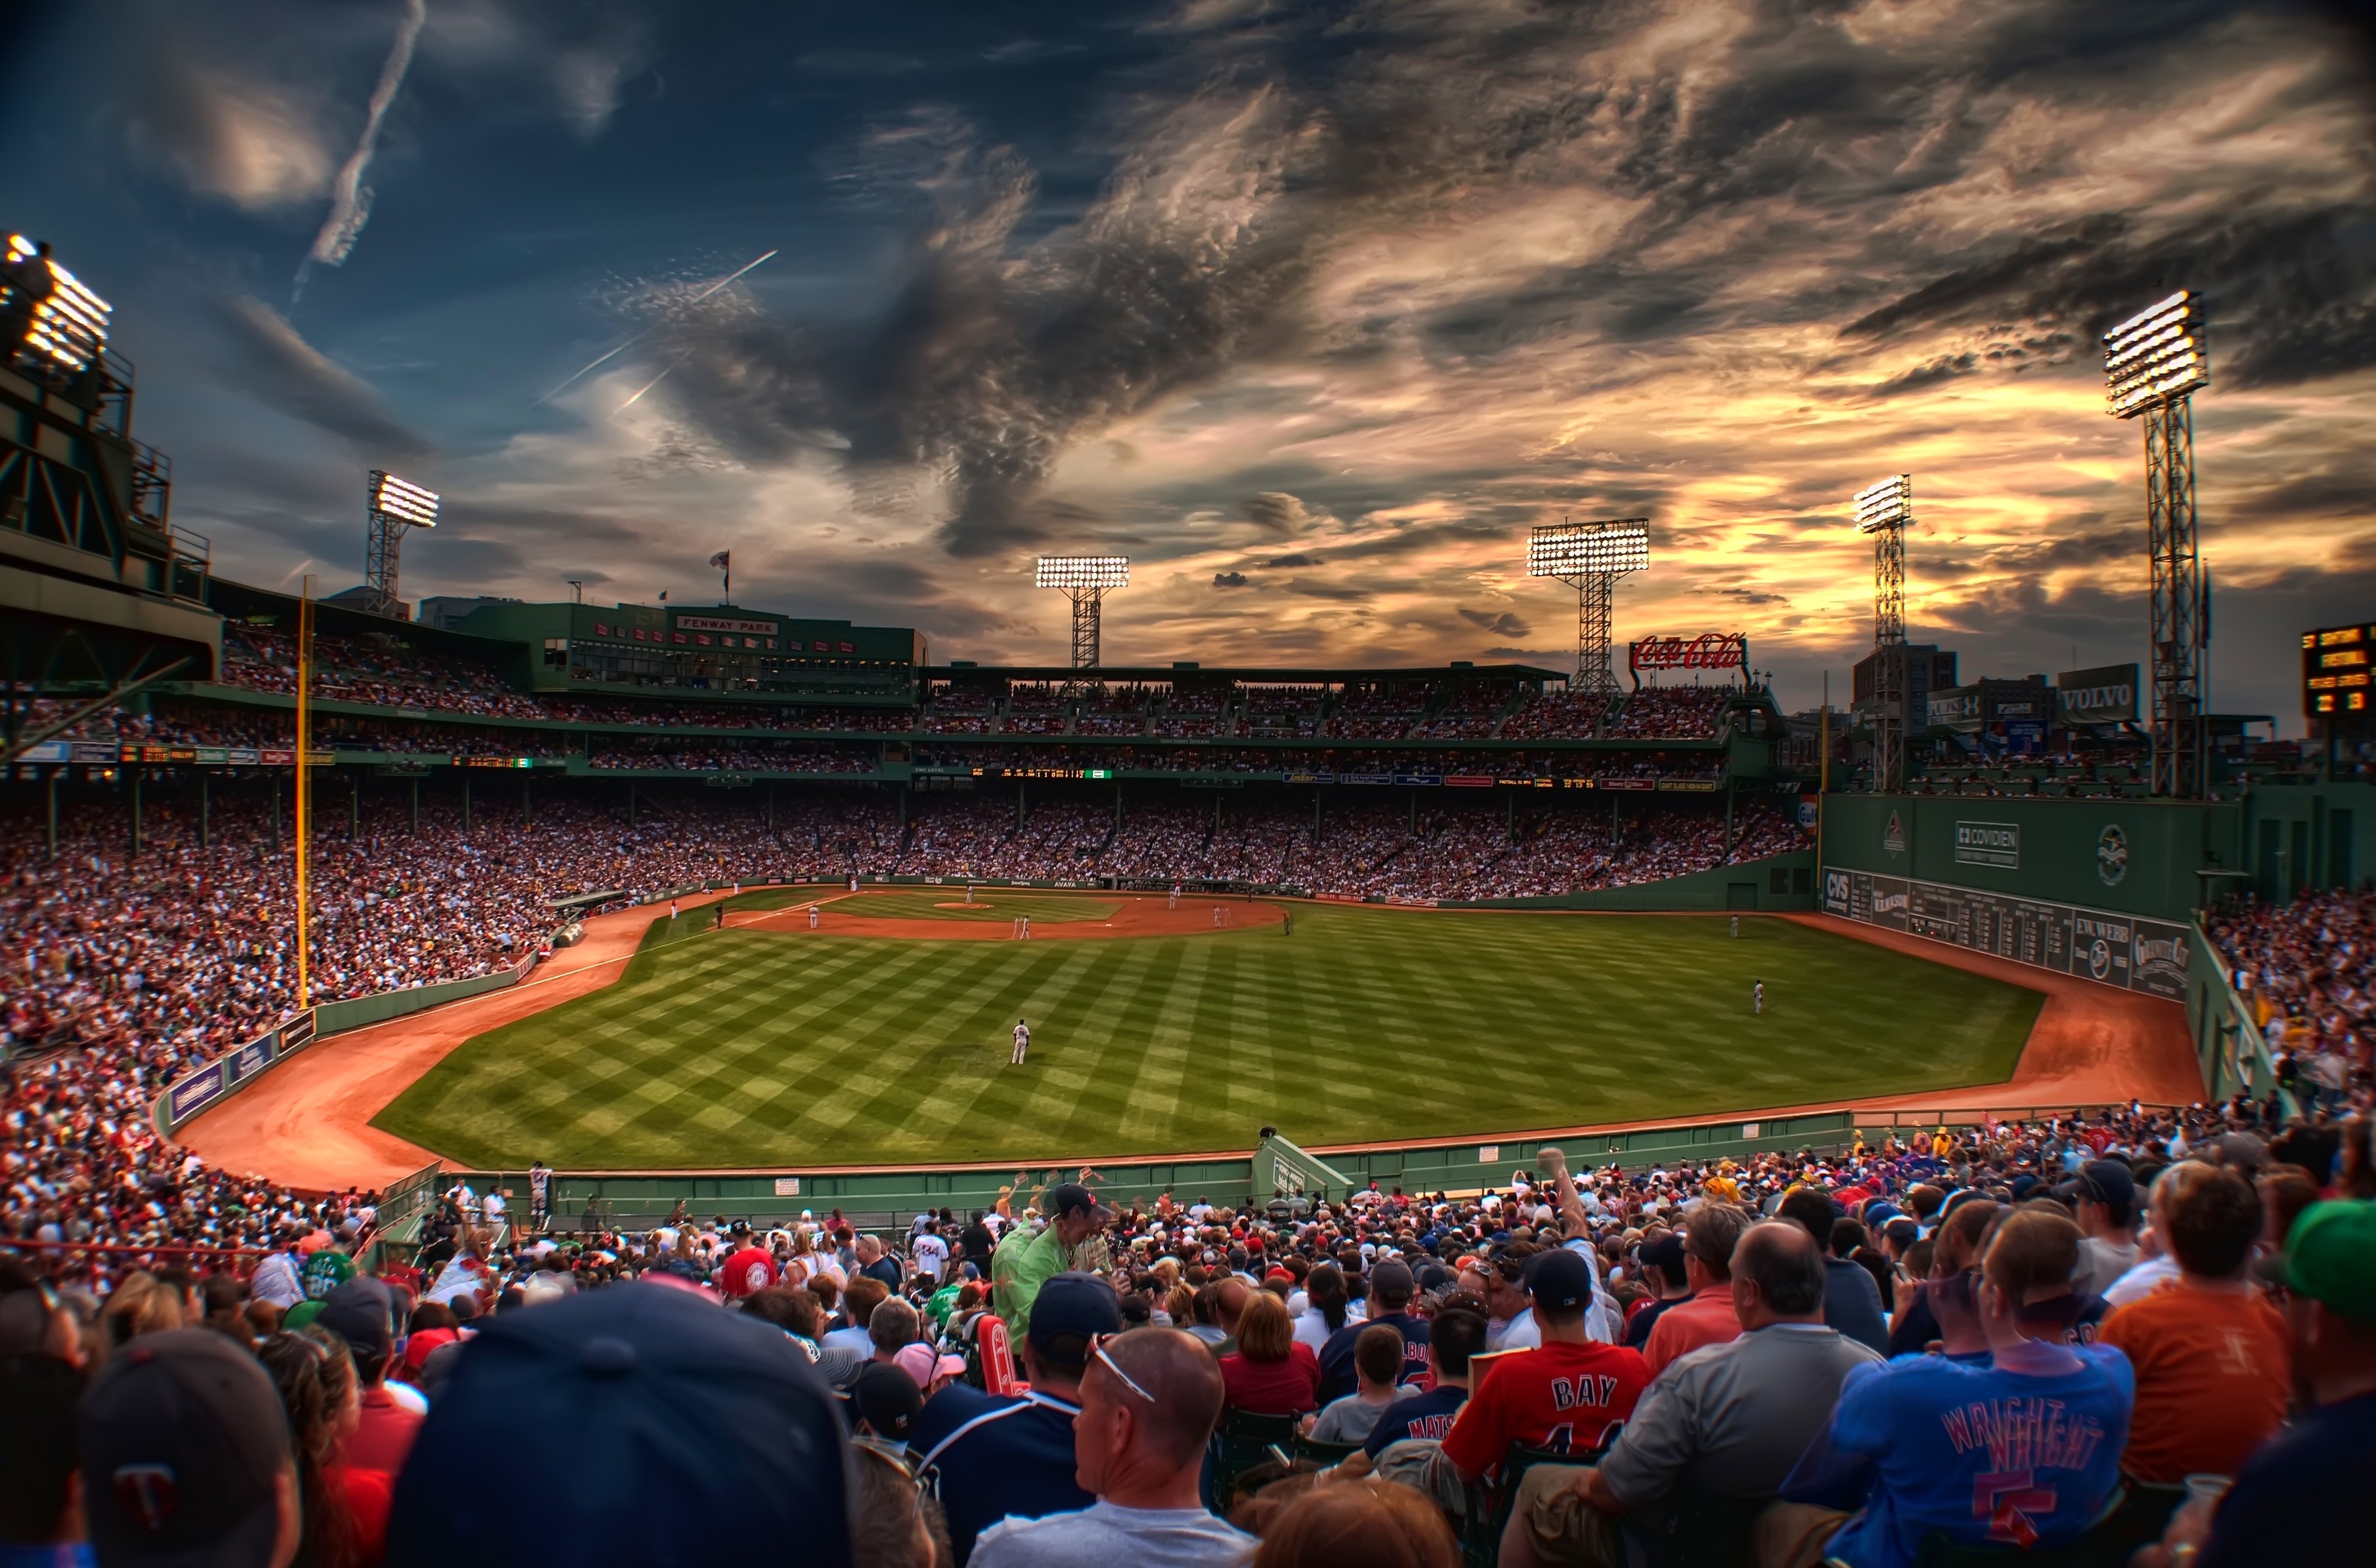 MLB reviews security at all parks after Fenway racial slurs